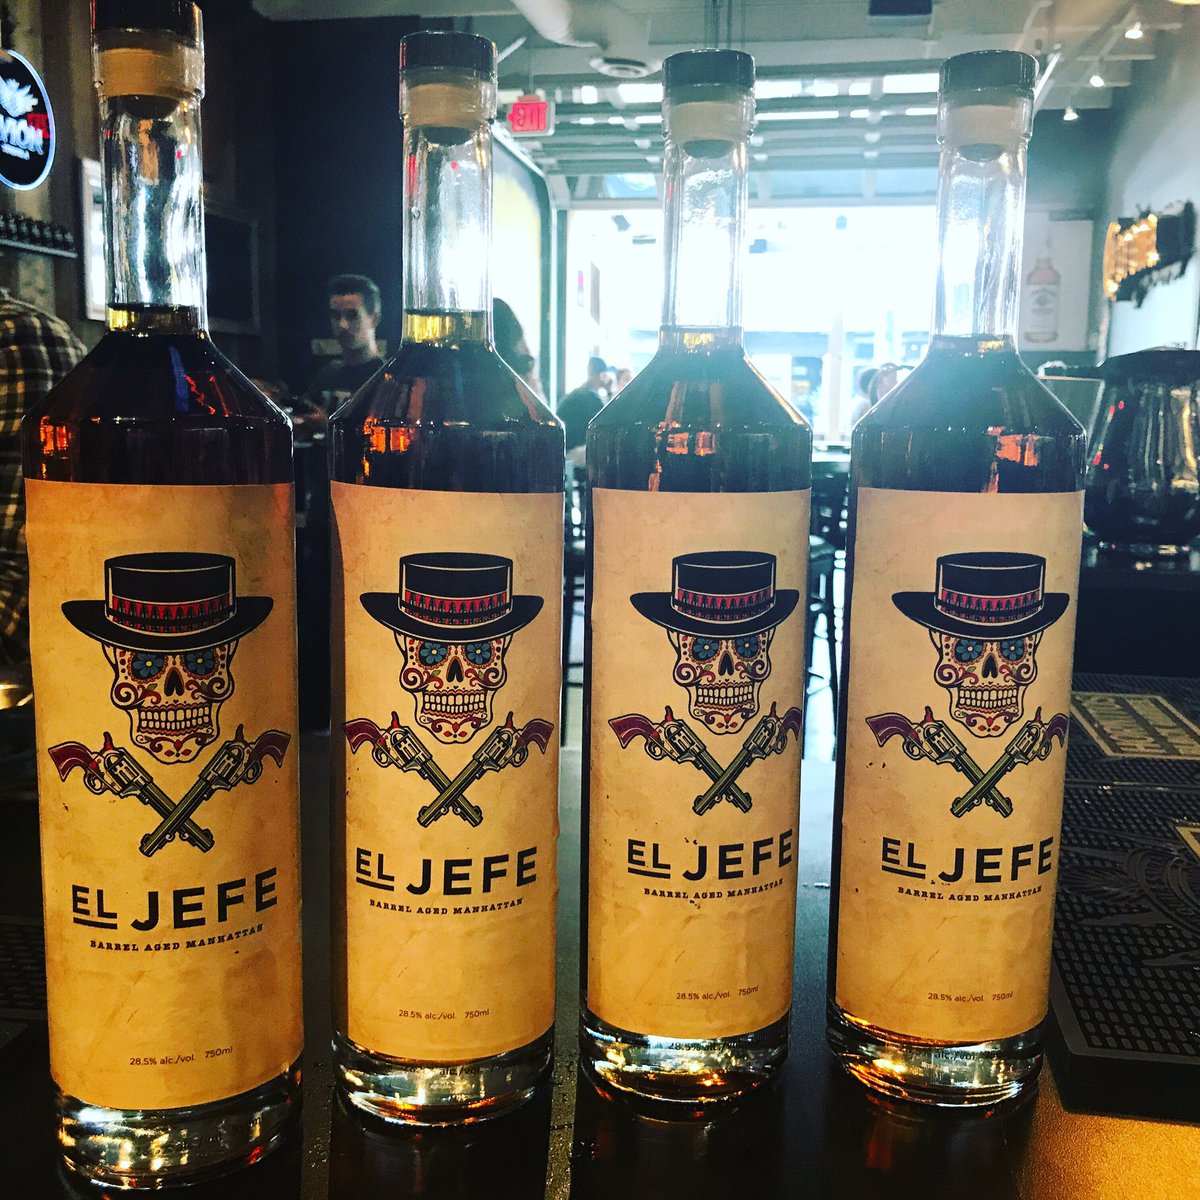 Get your long weekend started with El Jefe! Barrel aged tequila manhattan perfected by our pals at @AnejoYYC & @parkdistillery 🥃 #eljefe